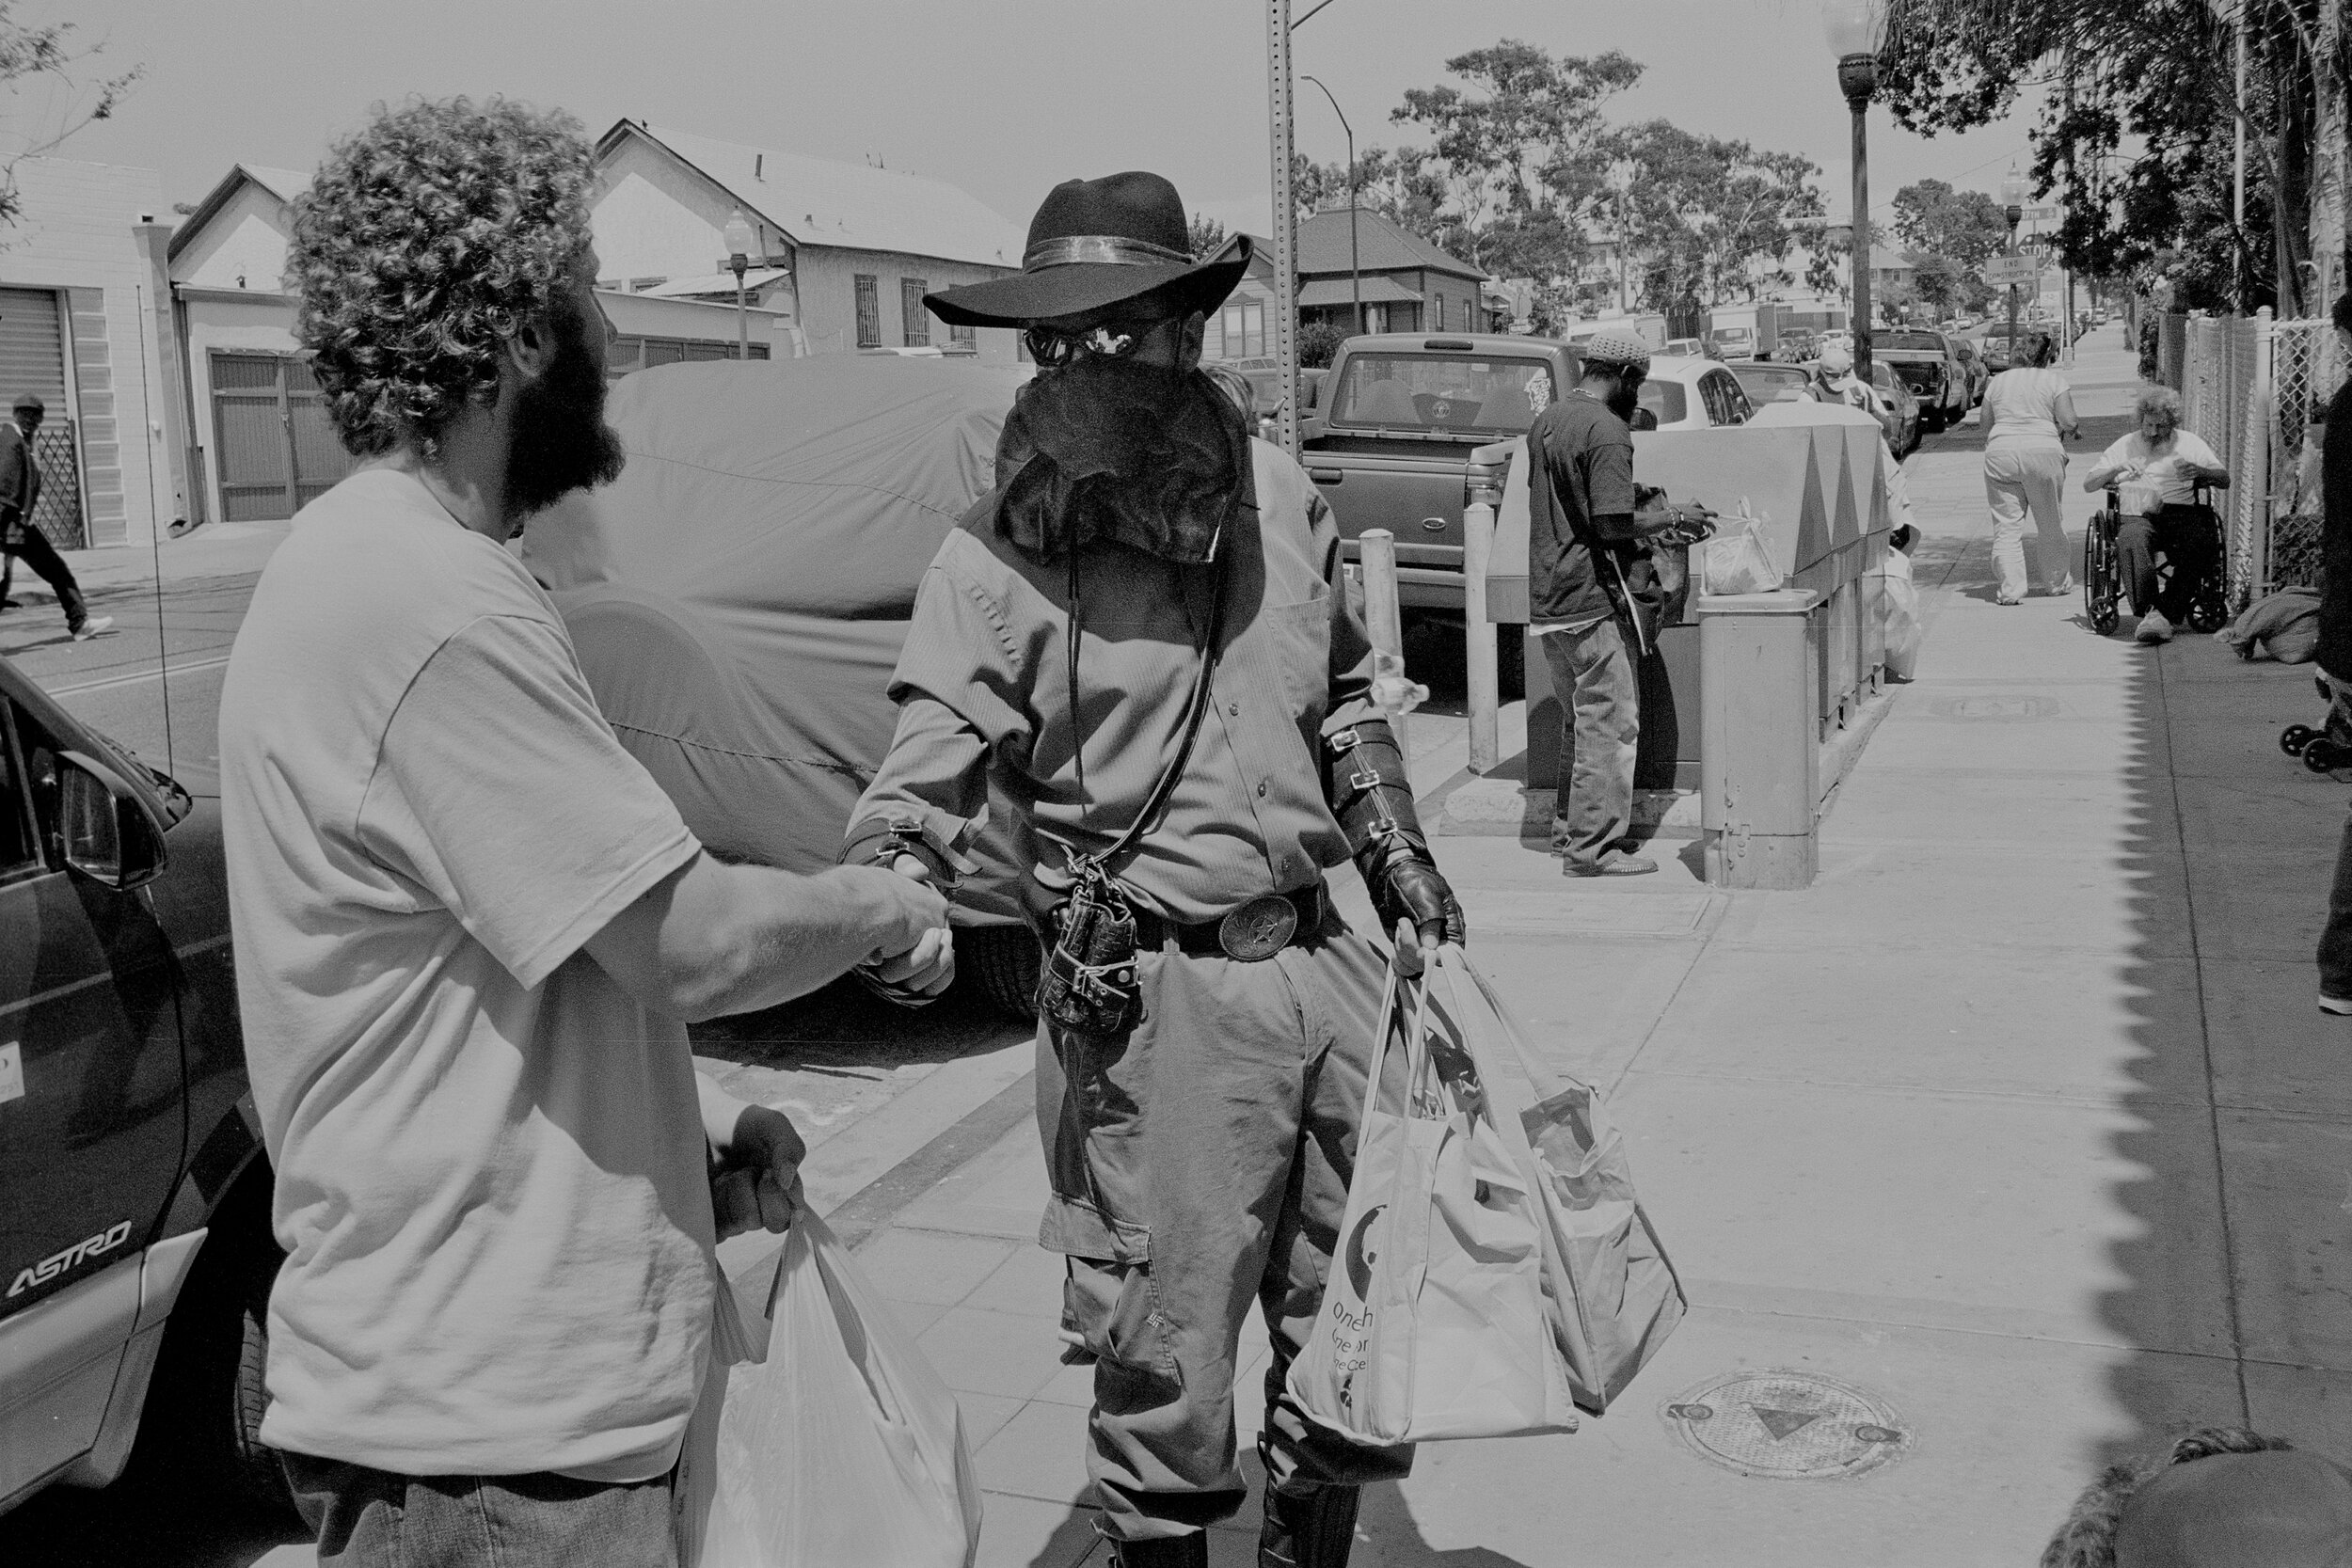  Geist hands out food to unhoused people during HOPE 2012 in San Diego, CA on July 14, 2012. 